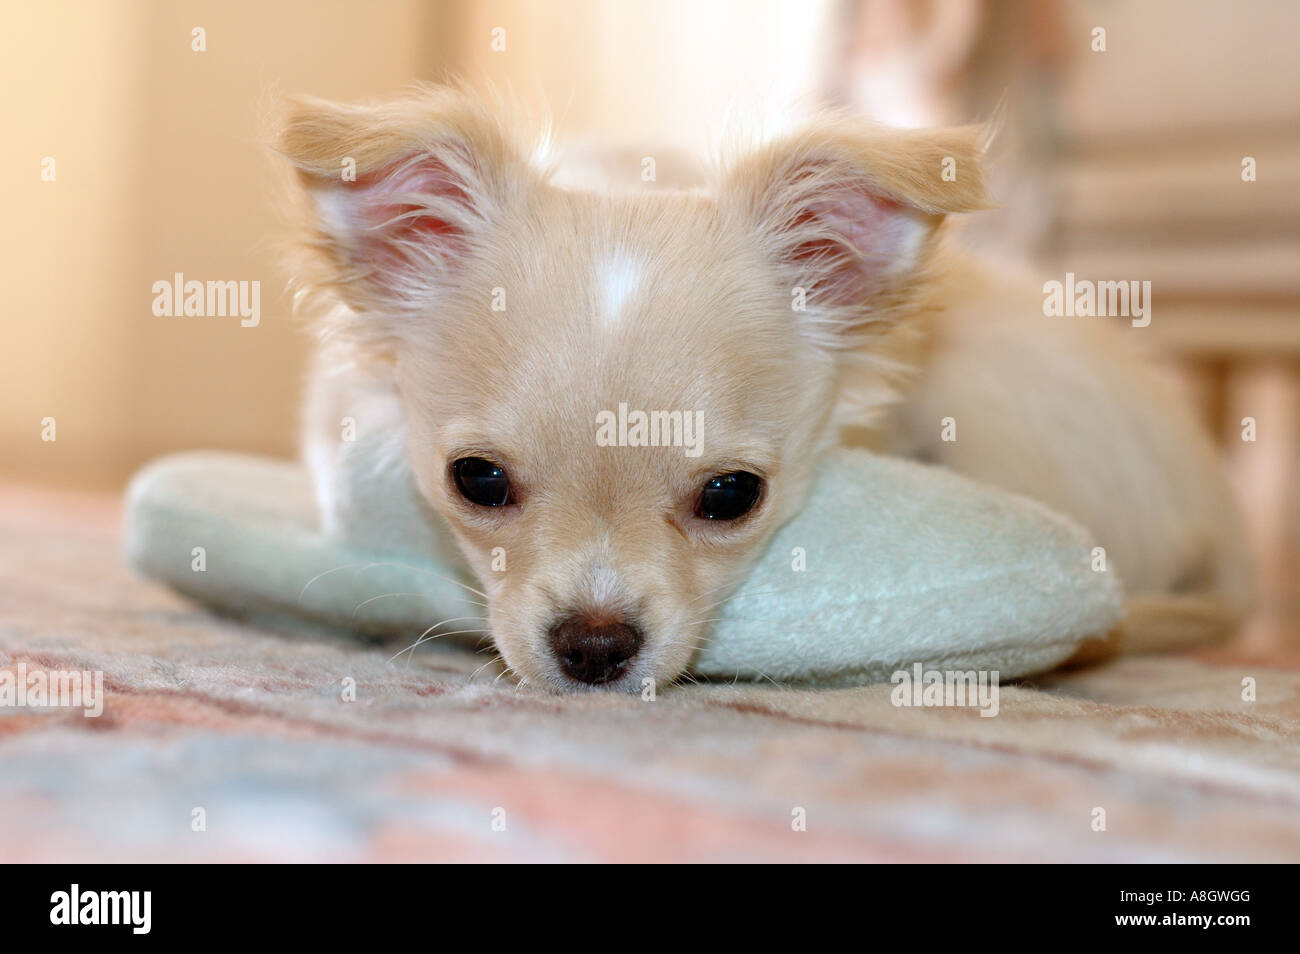 A cute chihuahua puppy resting hist chin on a slipper Stock Photo